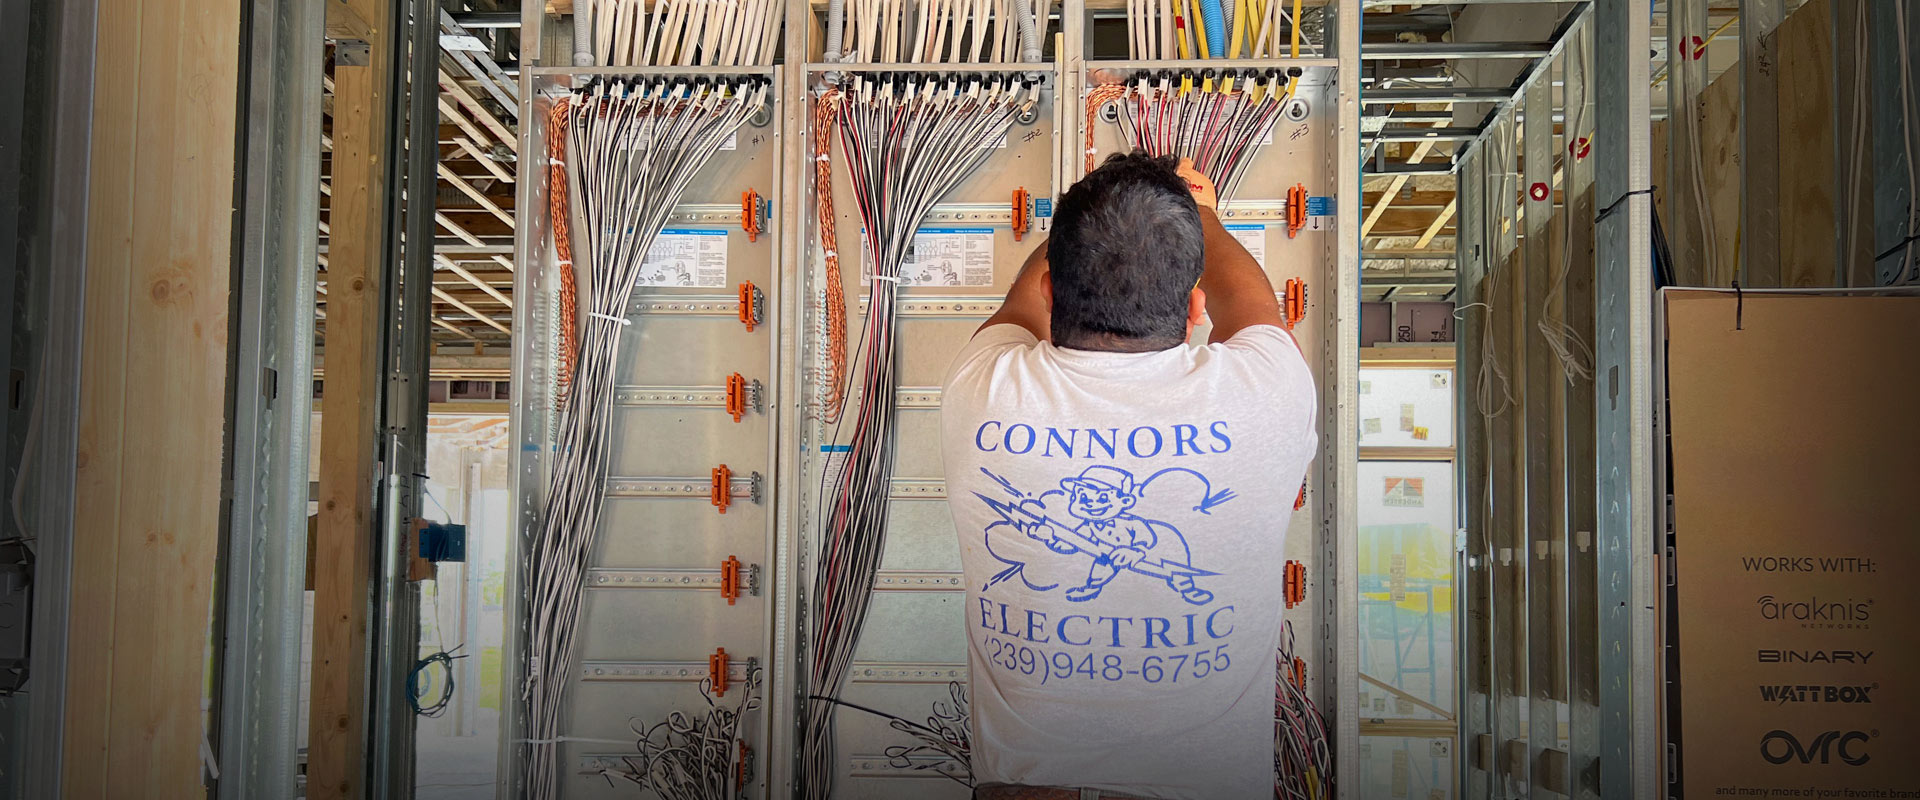 Electrical breaker panel repair and installation completed by Connors Electric Inc.